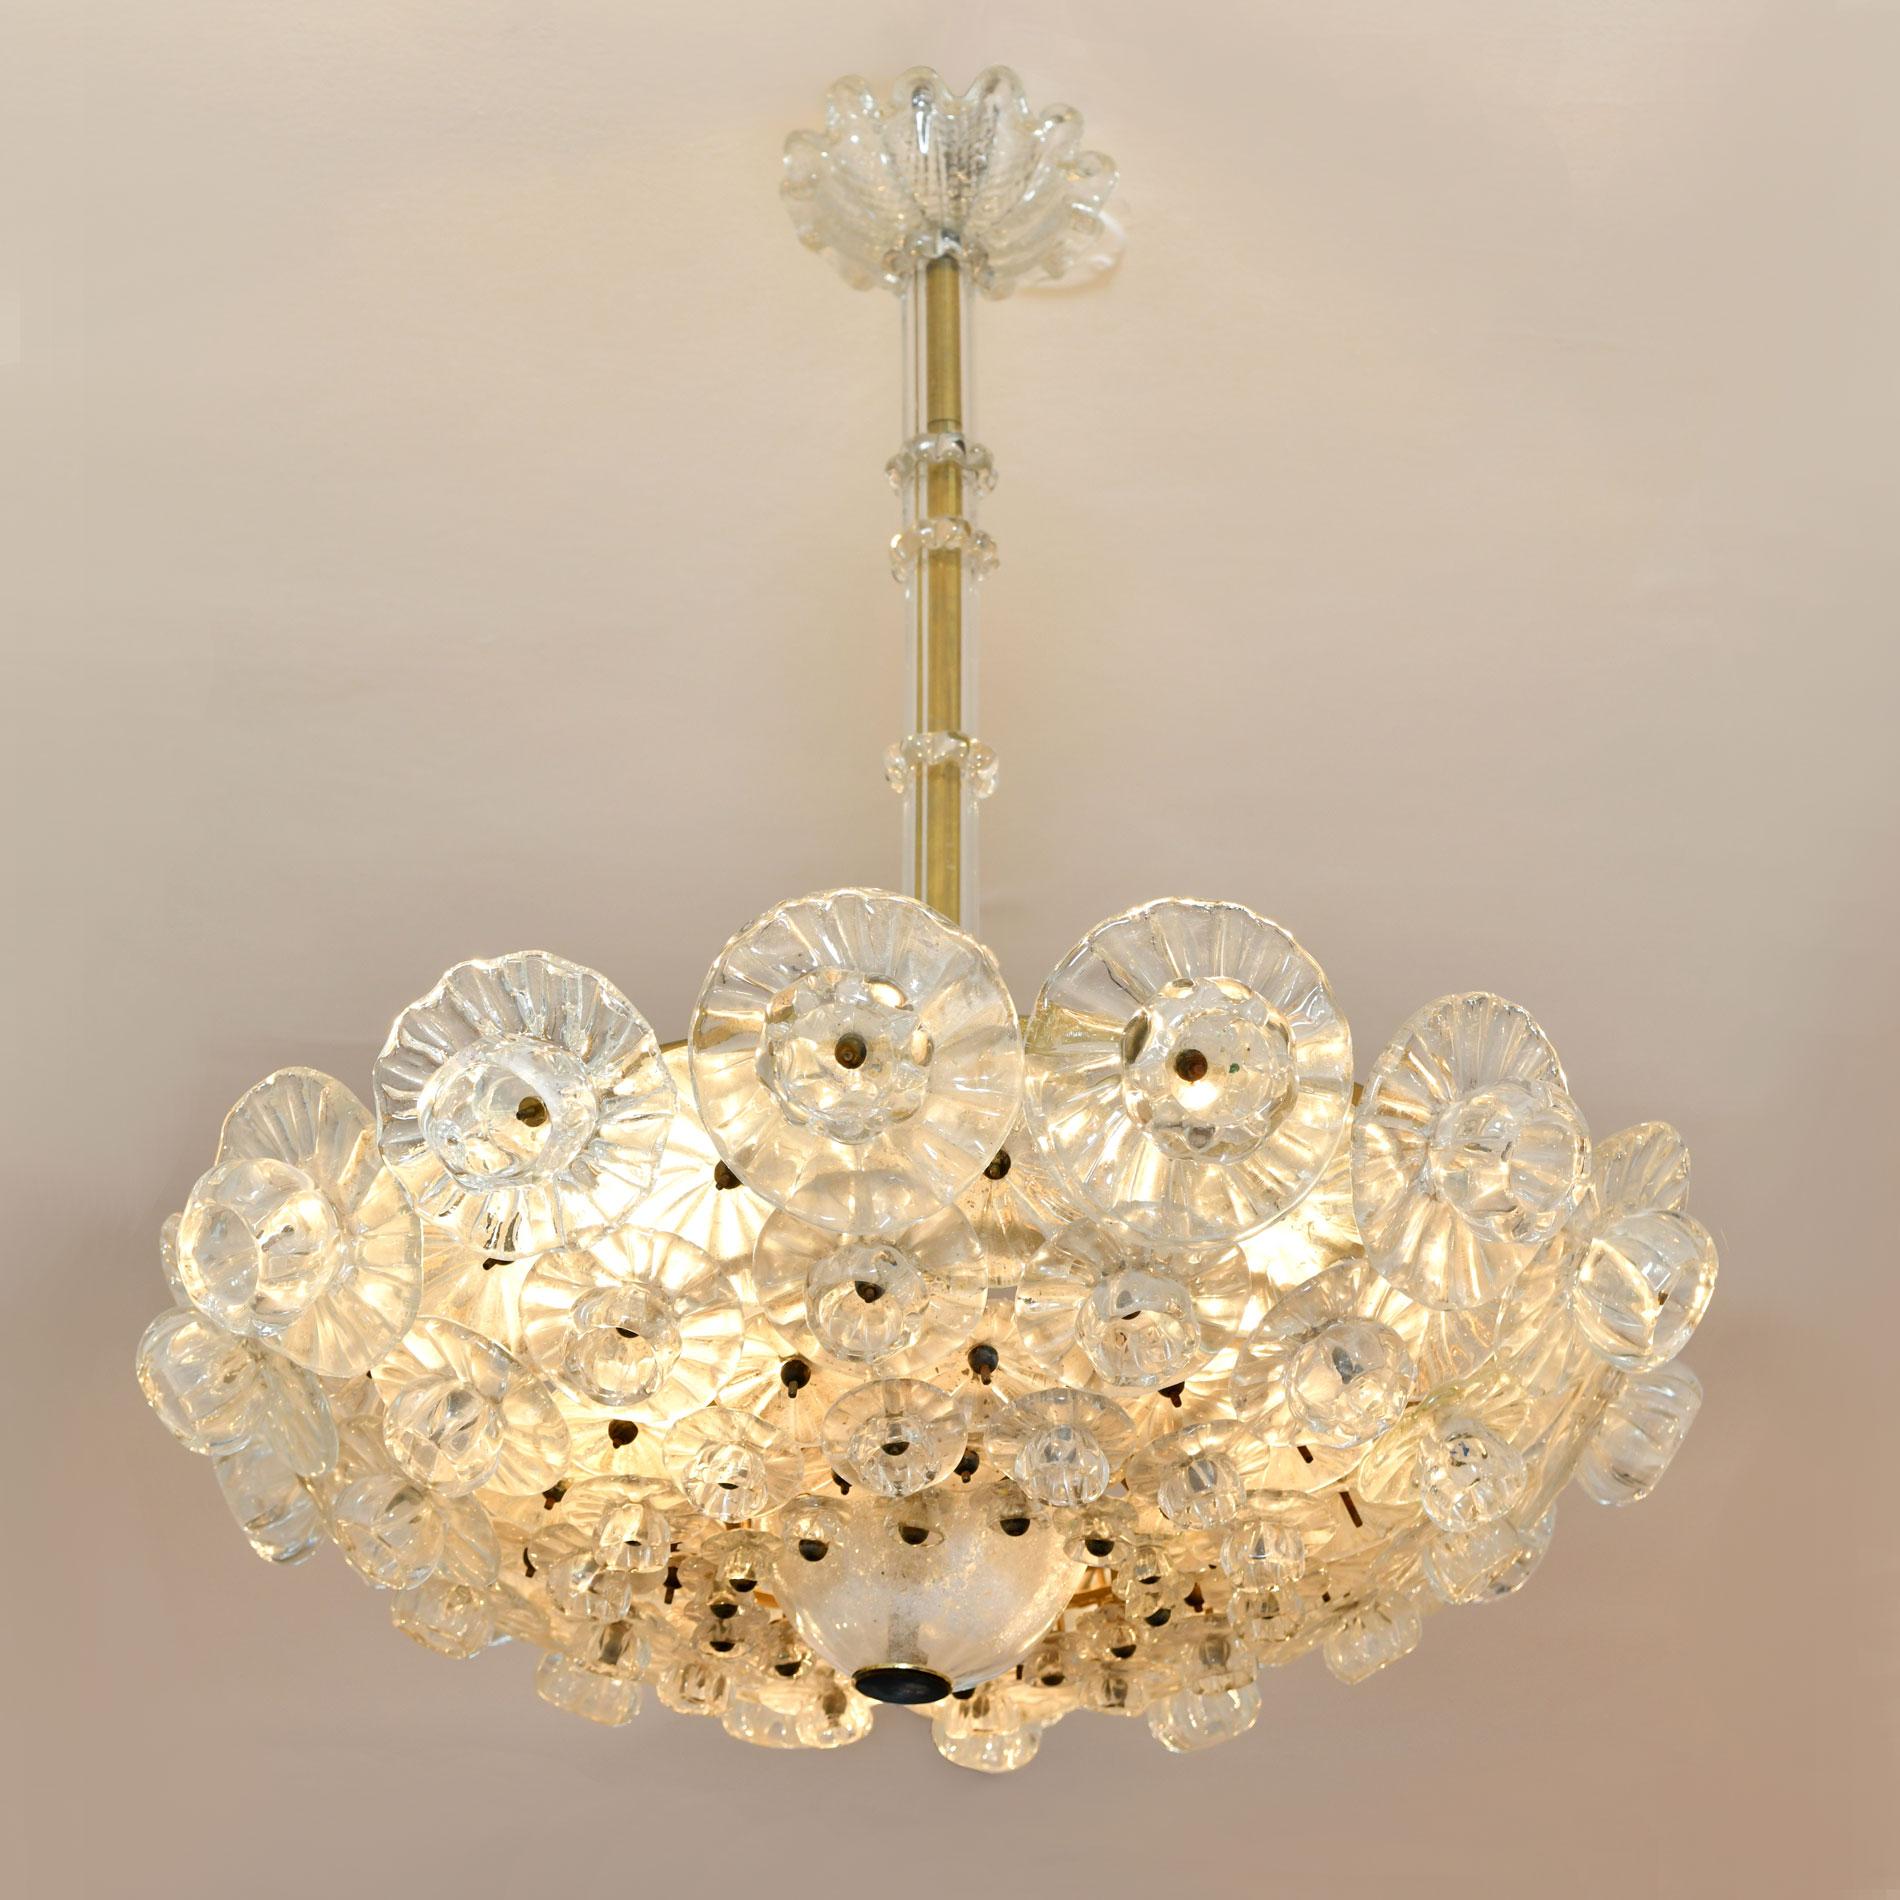 Romantic flower chandelier made up of individual overlapping glass flowers graded in four different sizes. The delicate detailing extends to the glass rod and fluted ceiling rose.